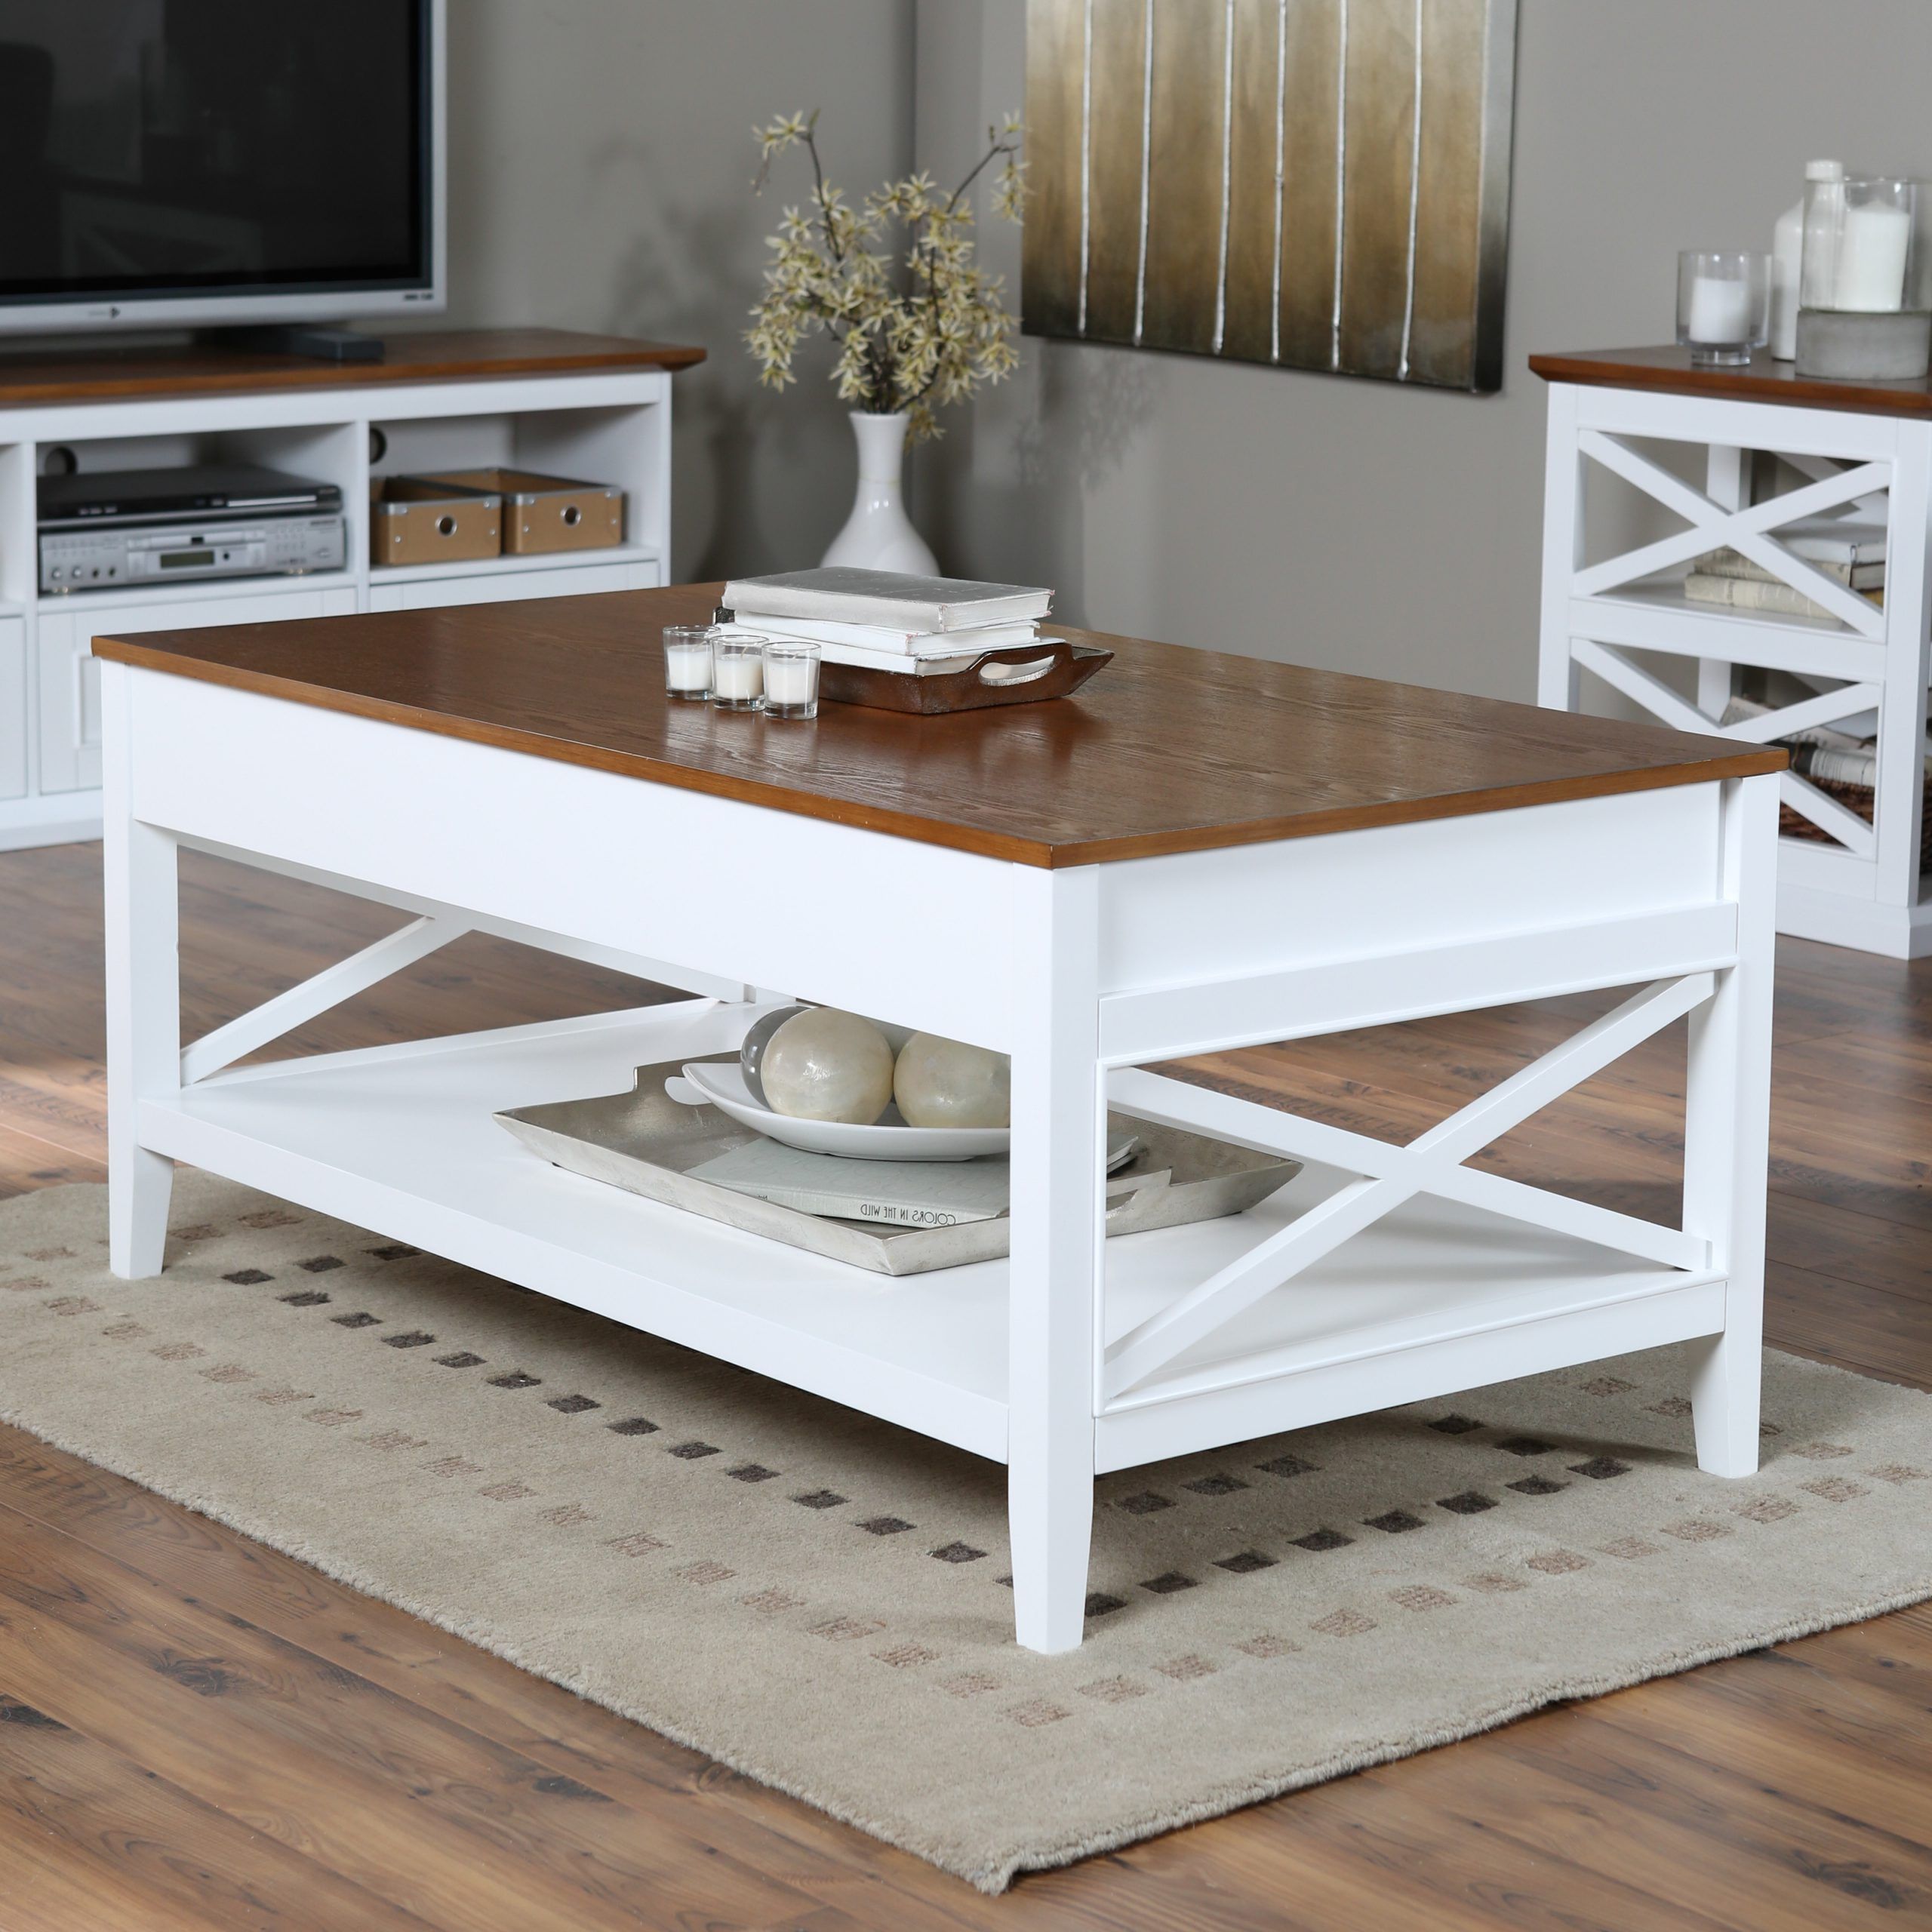 Square Weathered White Wood Coffee Tables With Best And Newest Belham Living Hampton Lift Top Coffee Table – Coffee Tables At Hayneedle (View 4 of 10)